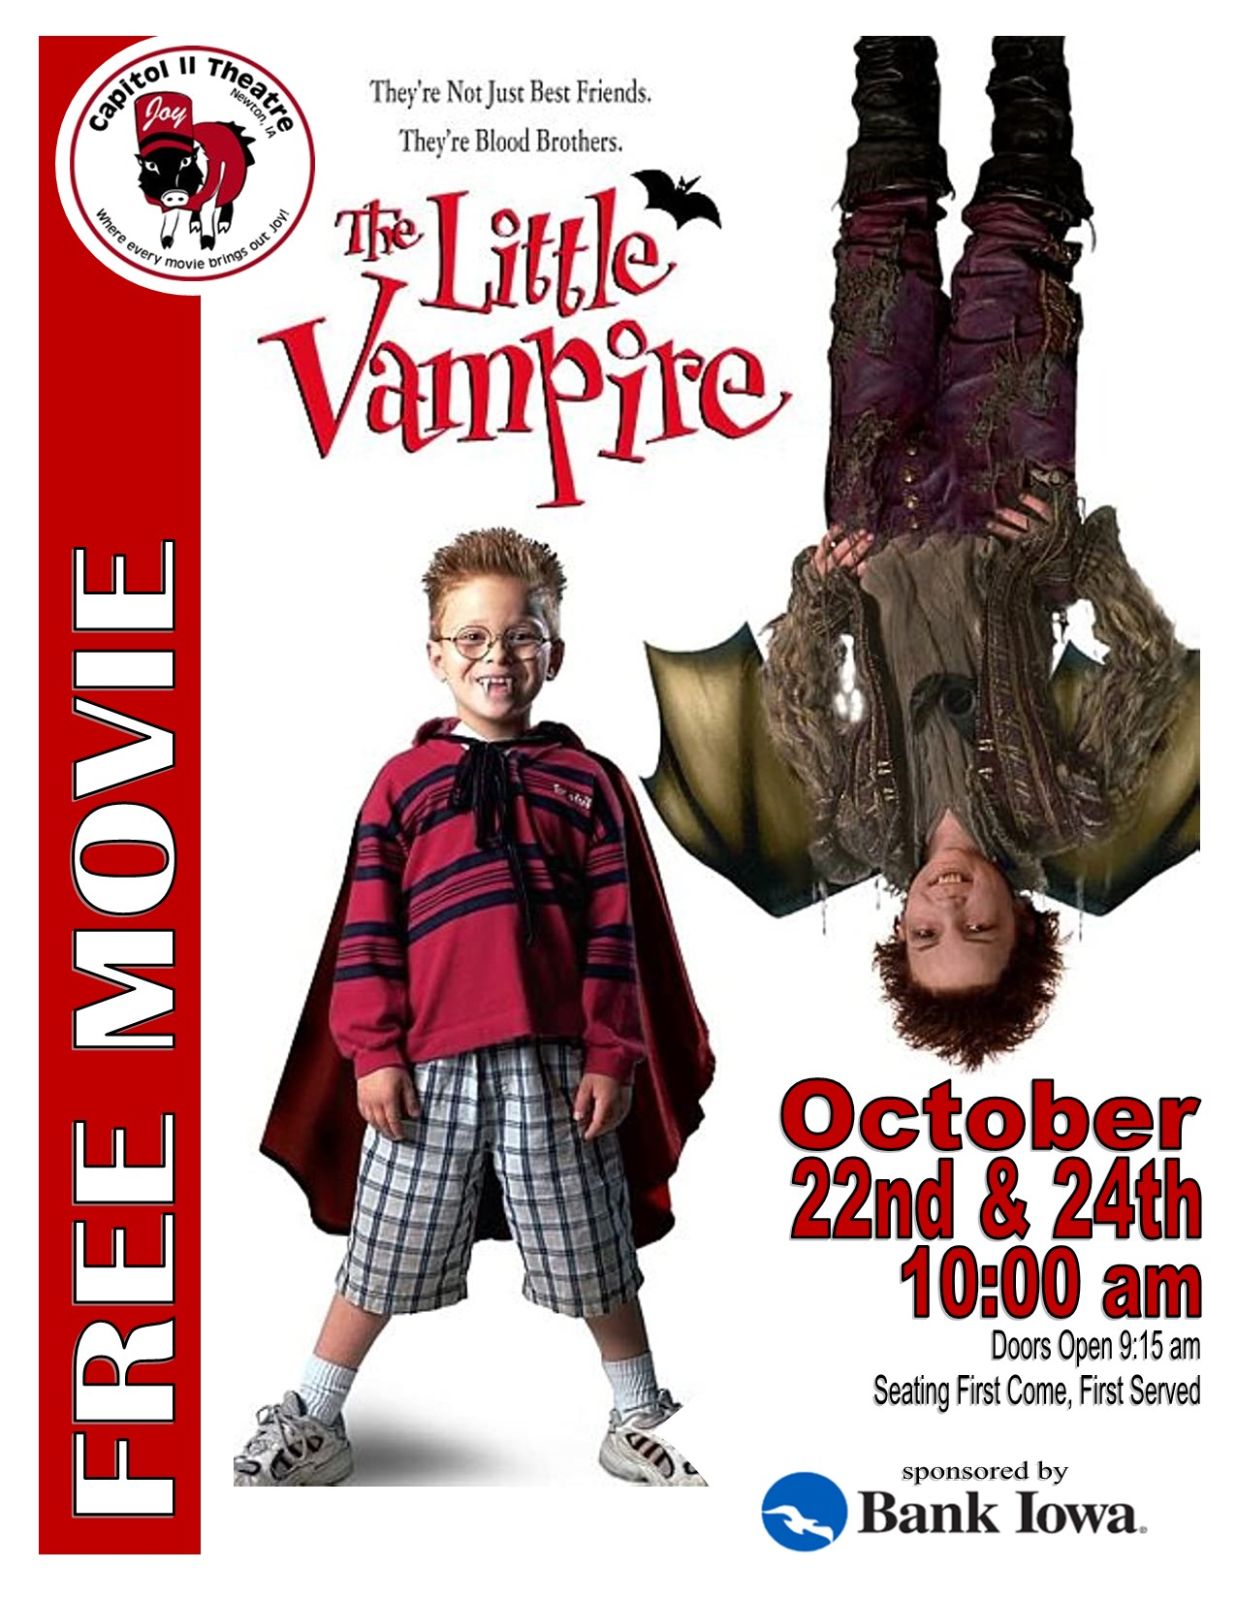 Event Promo Photo For Free Movie-The Little Vampire